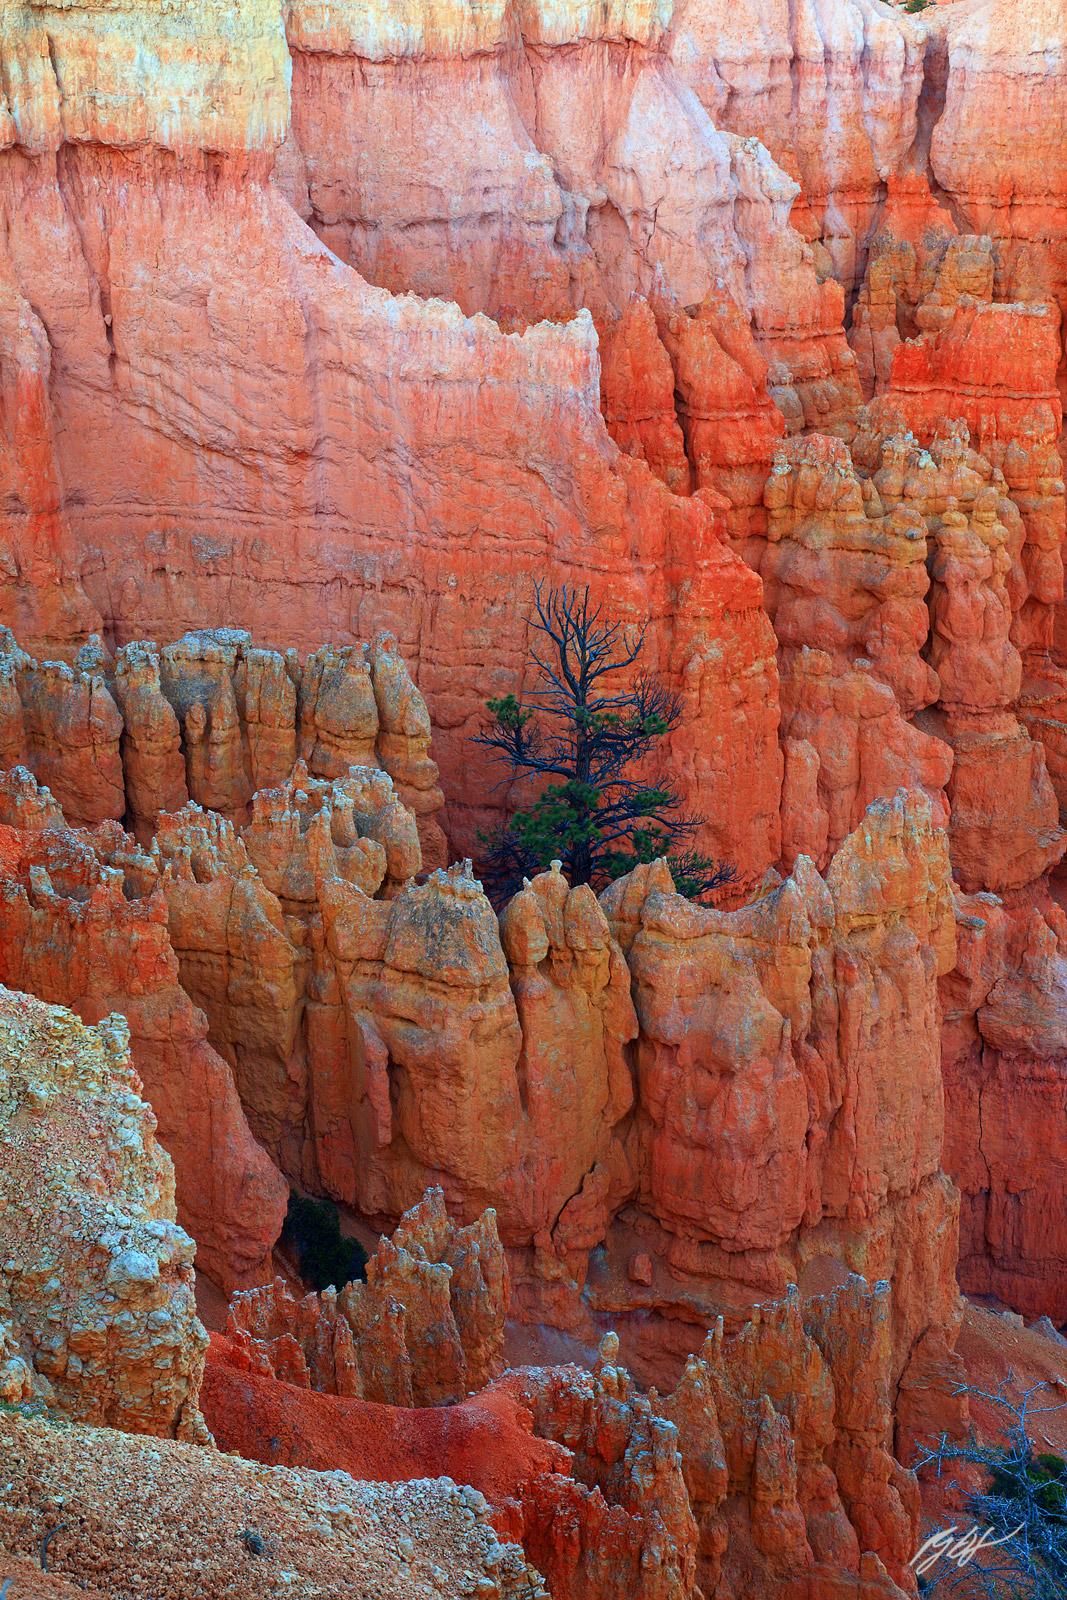 Hoodoo Formations from the Rim of Bryce Canyon in Bryce Canyon National Park in Utah